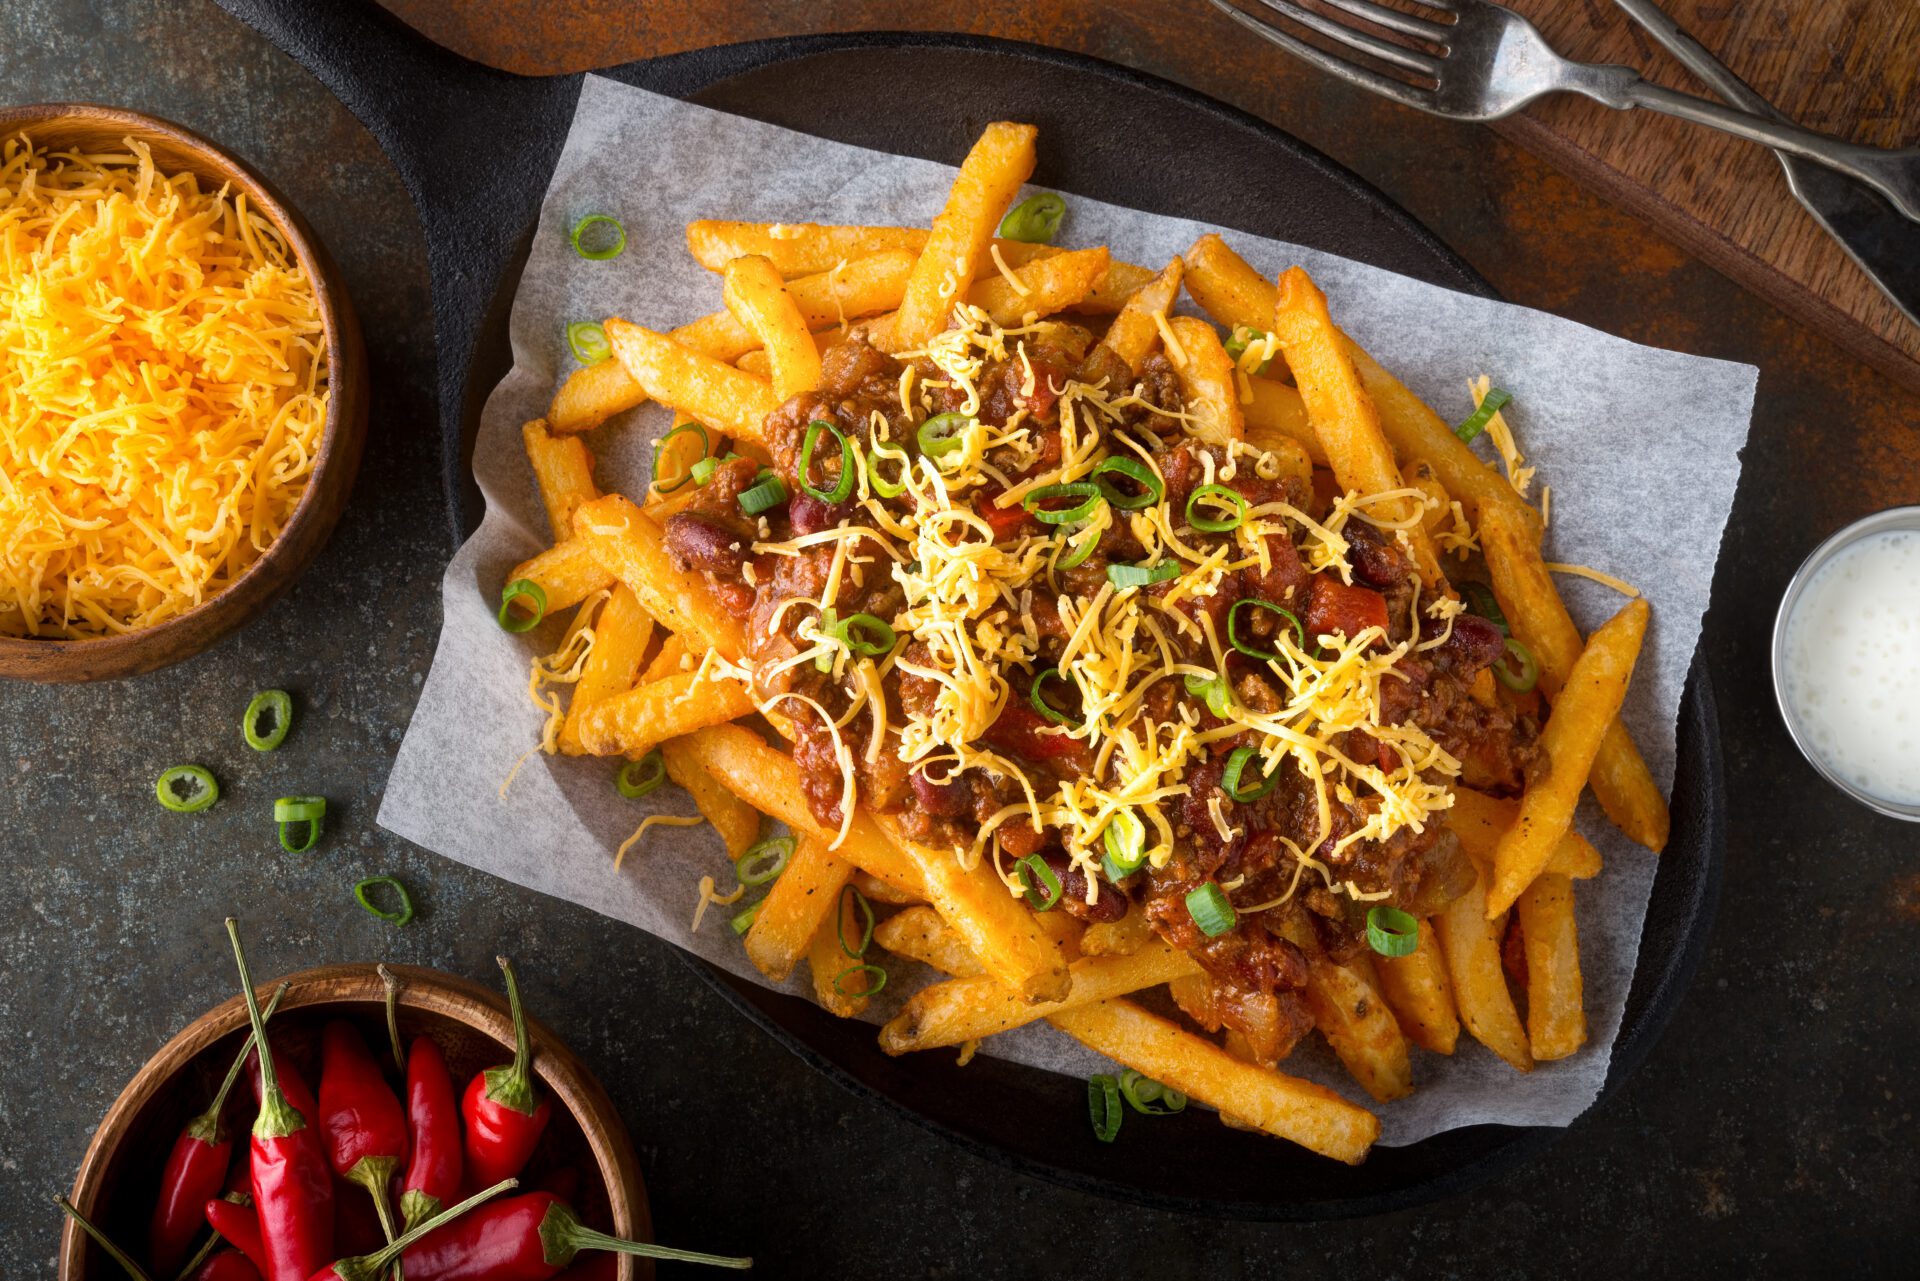 A plate of chili cheese fries with toppings.